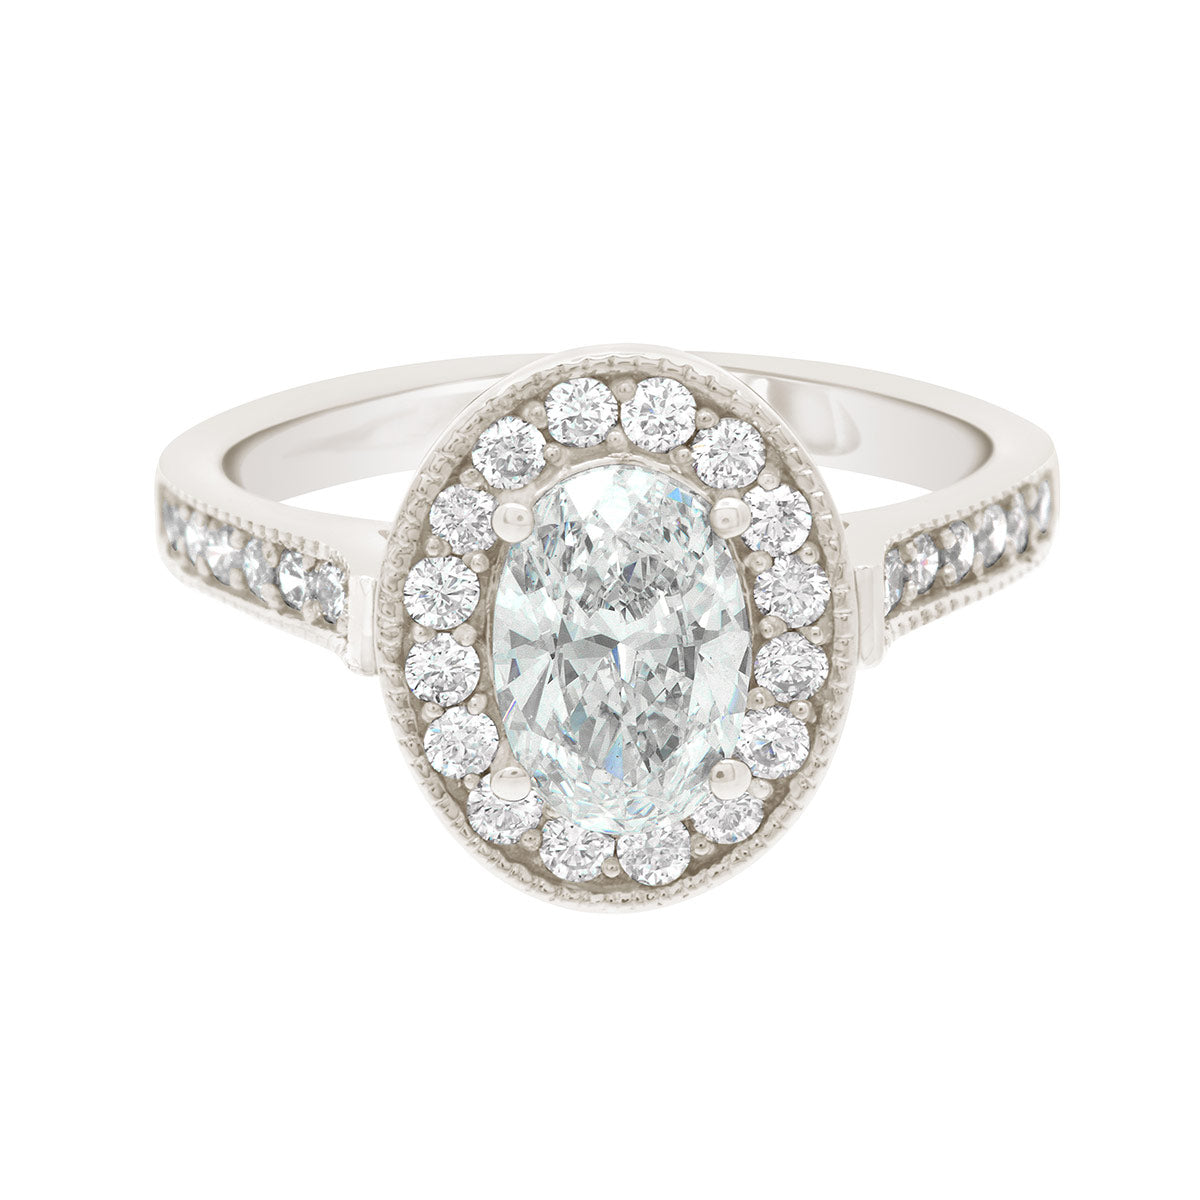 Antique Oval Engagement Ring in white gold